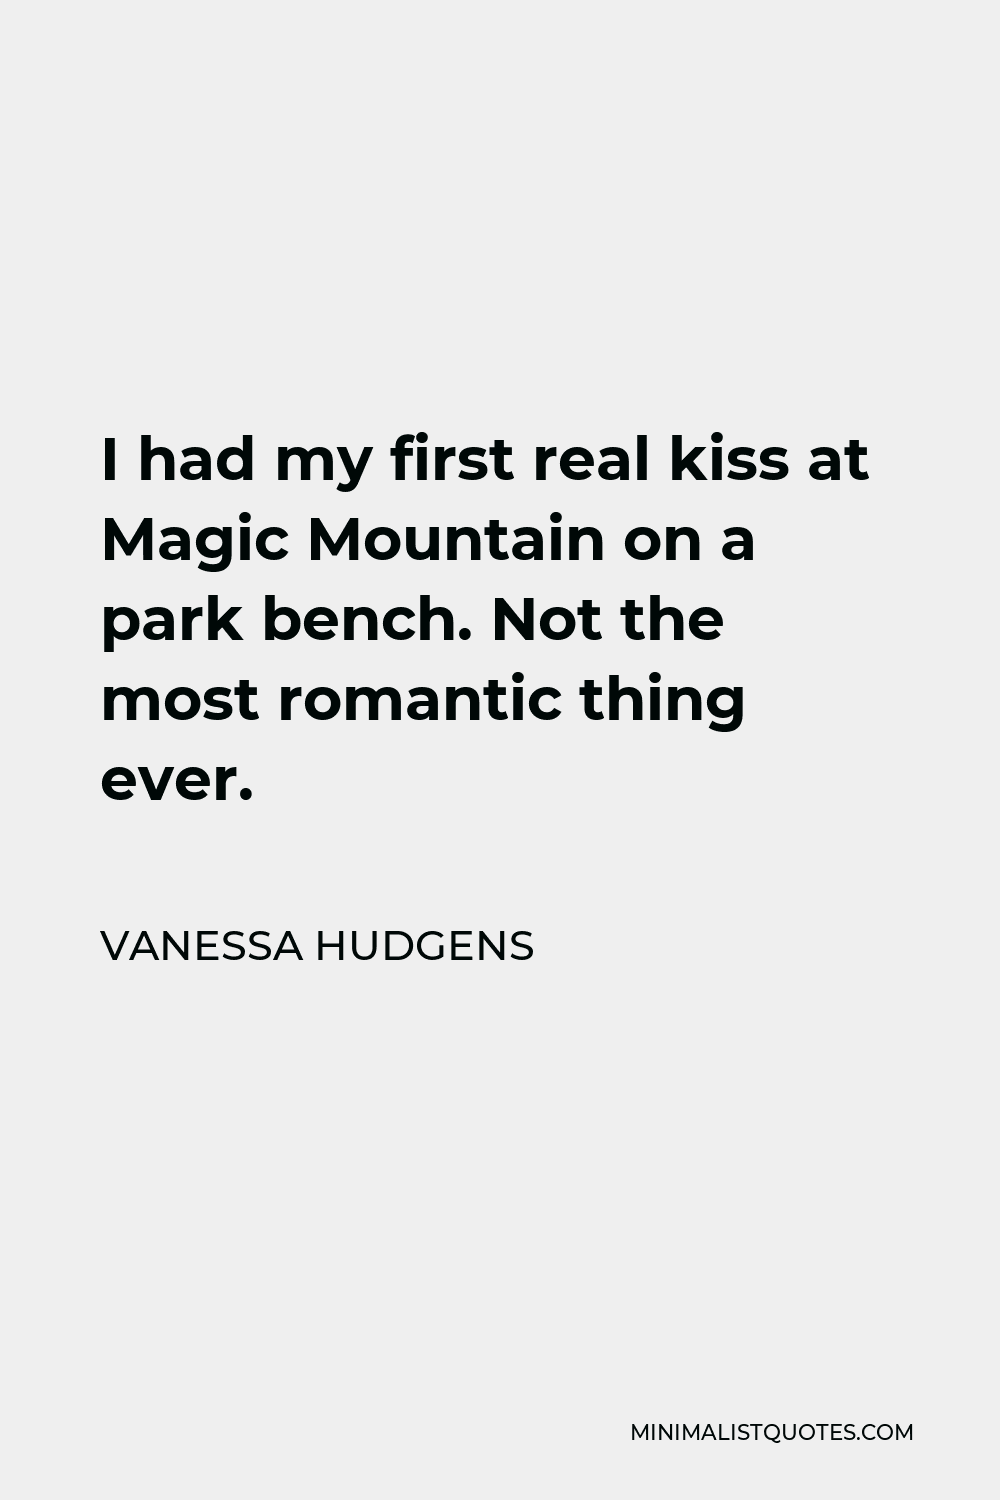 Vanessa Hudgens Quote - I had my first real kiss at Magic Mountain on a park bench. Not the most romantic thing ever.